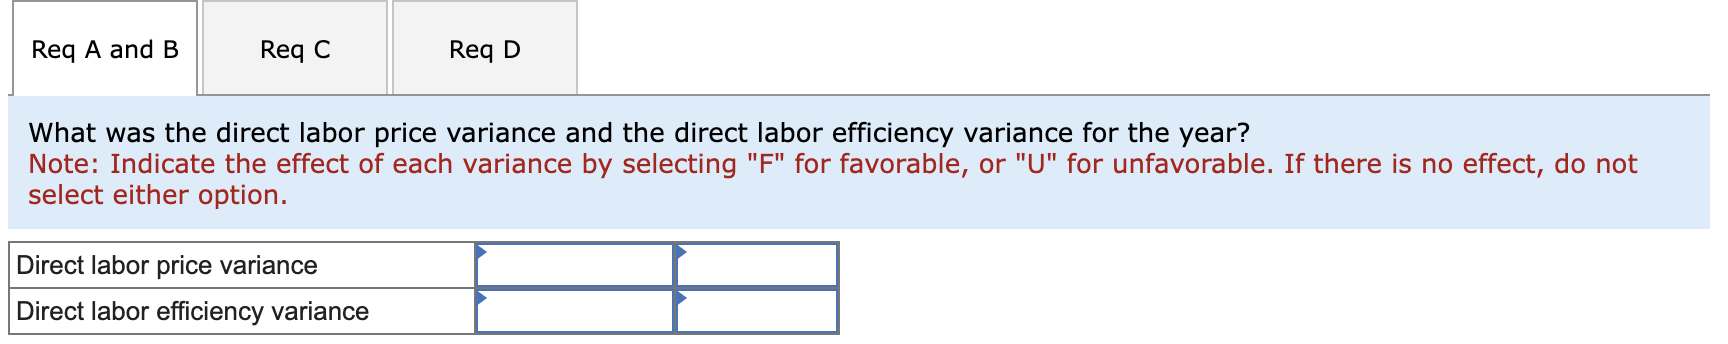 Req A and B Req C Reg D What was the direct labor price variance and the direct labor efficiency variance for